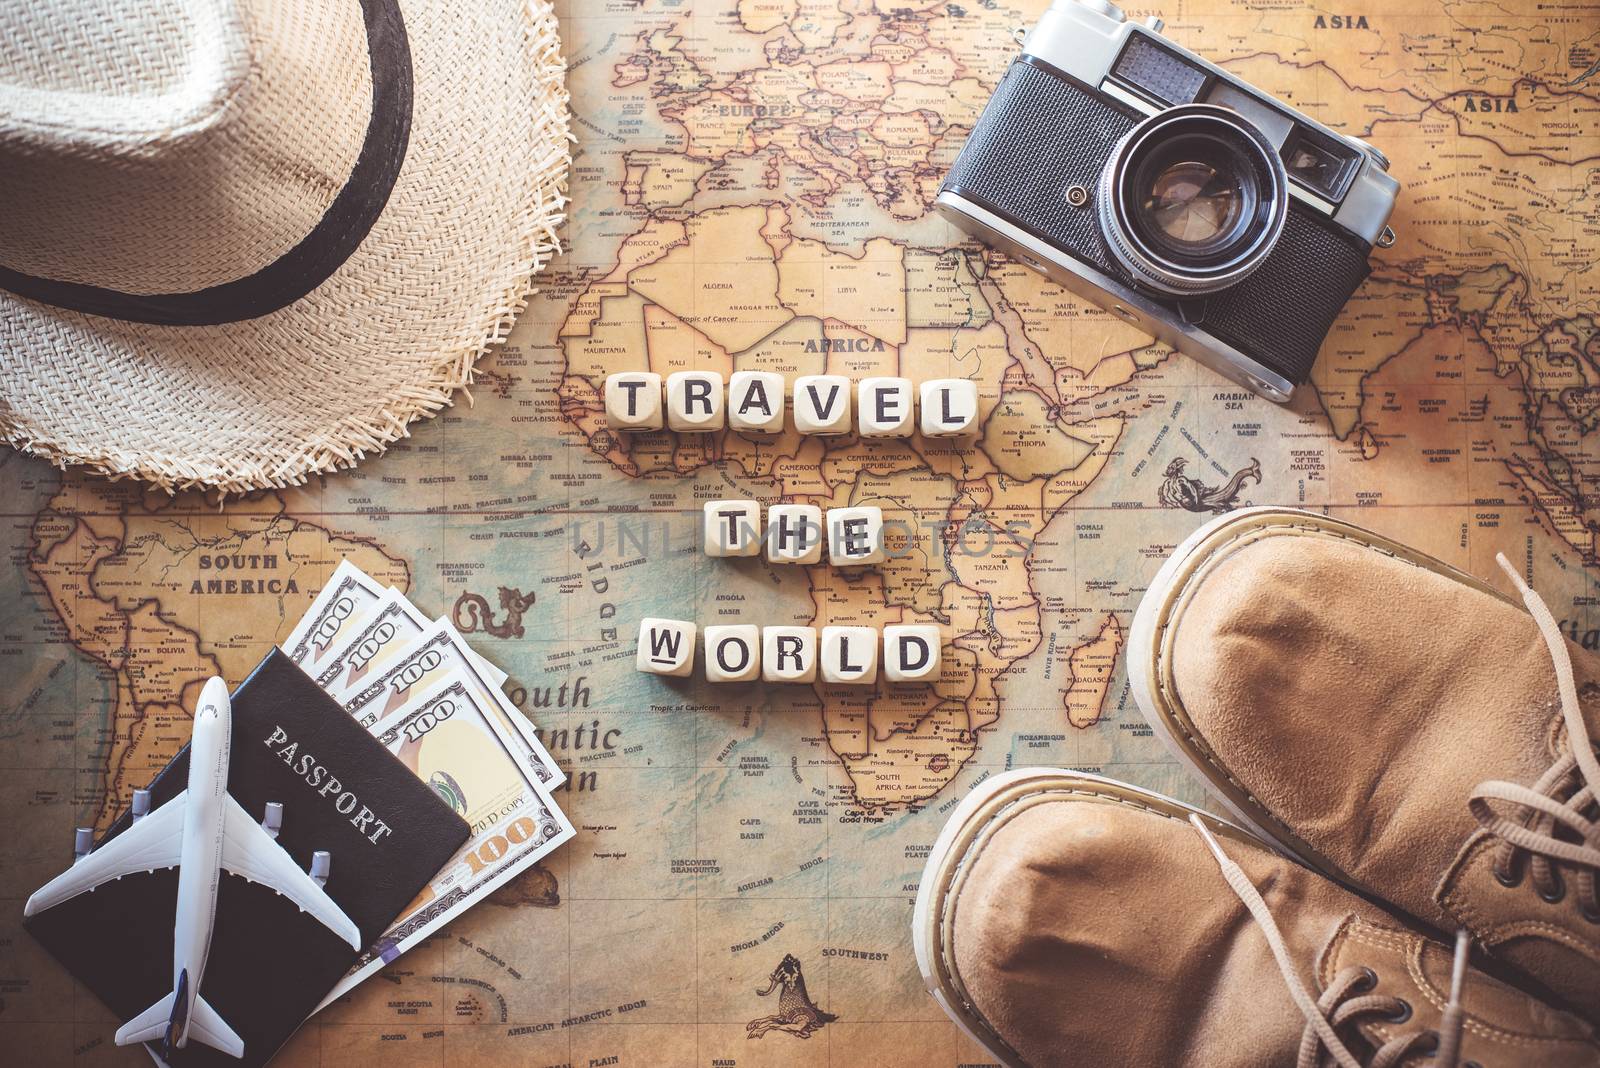 keywords "TRAVEL THE WORLD" and items accessories for the travel by photobyphotoboy